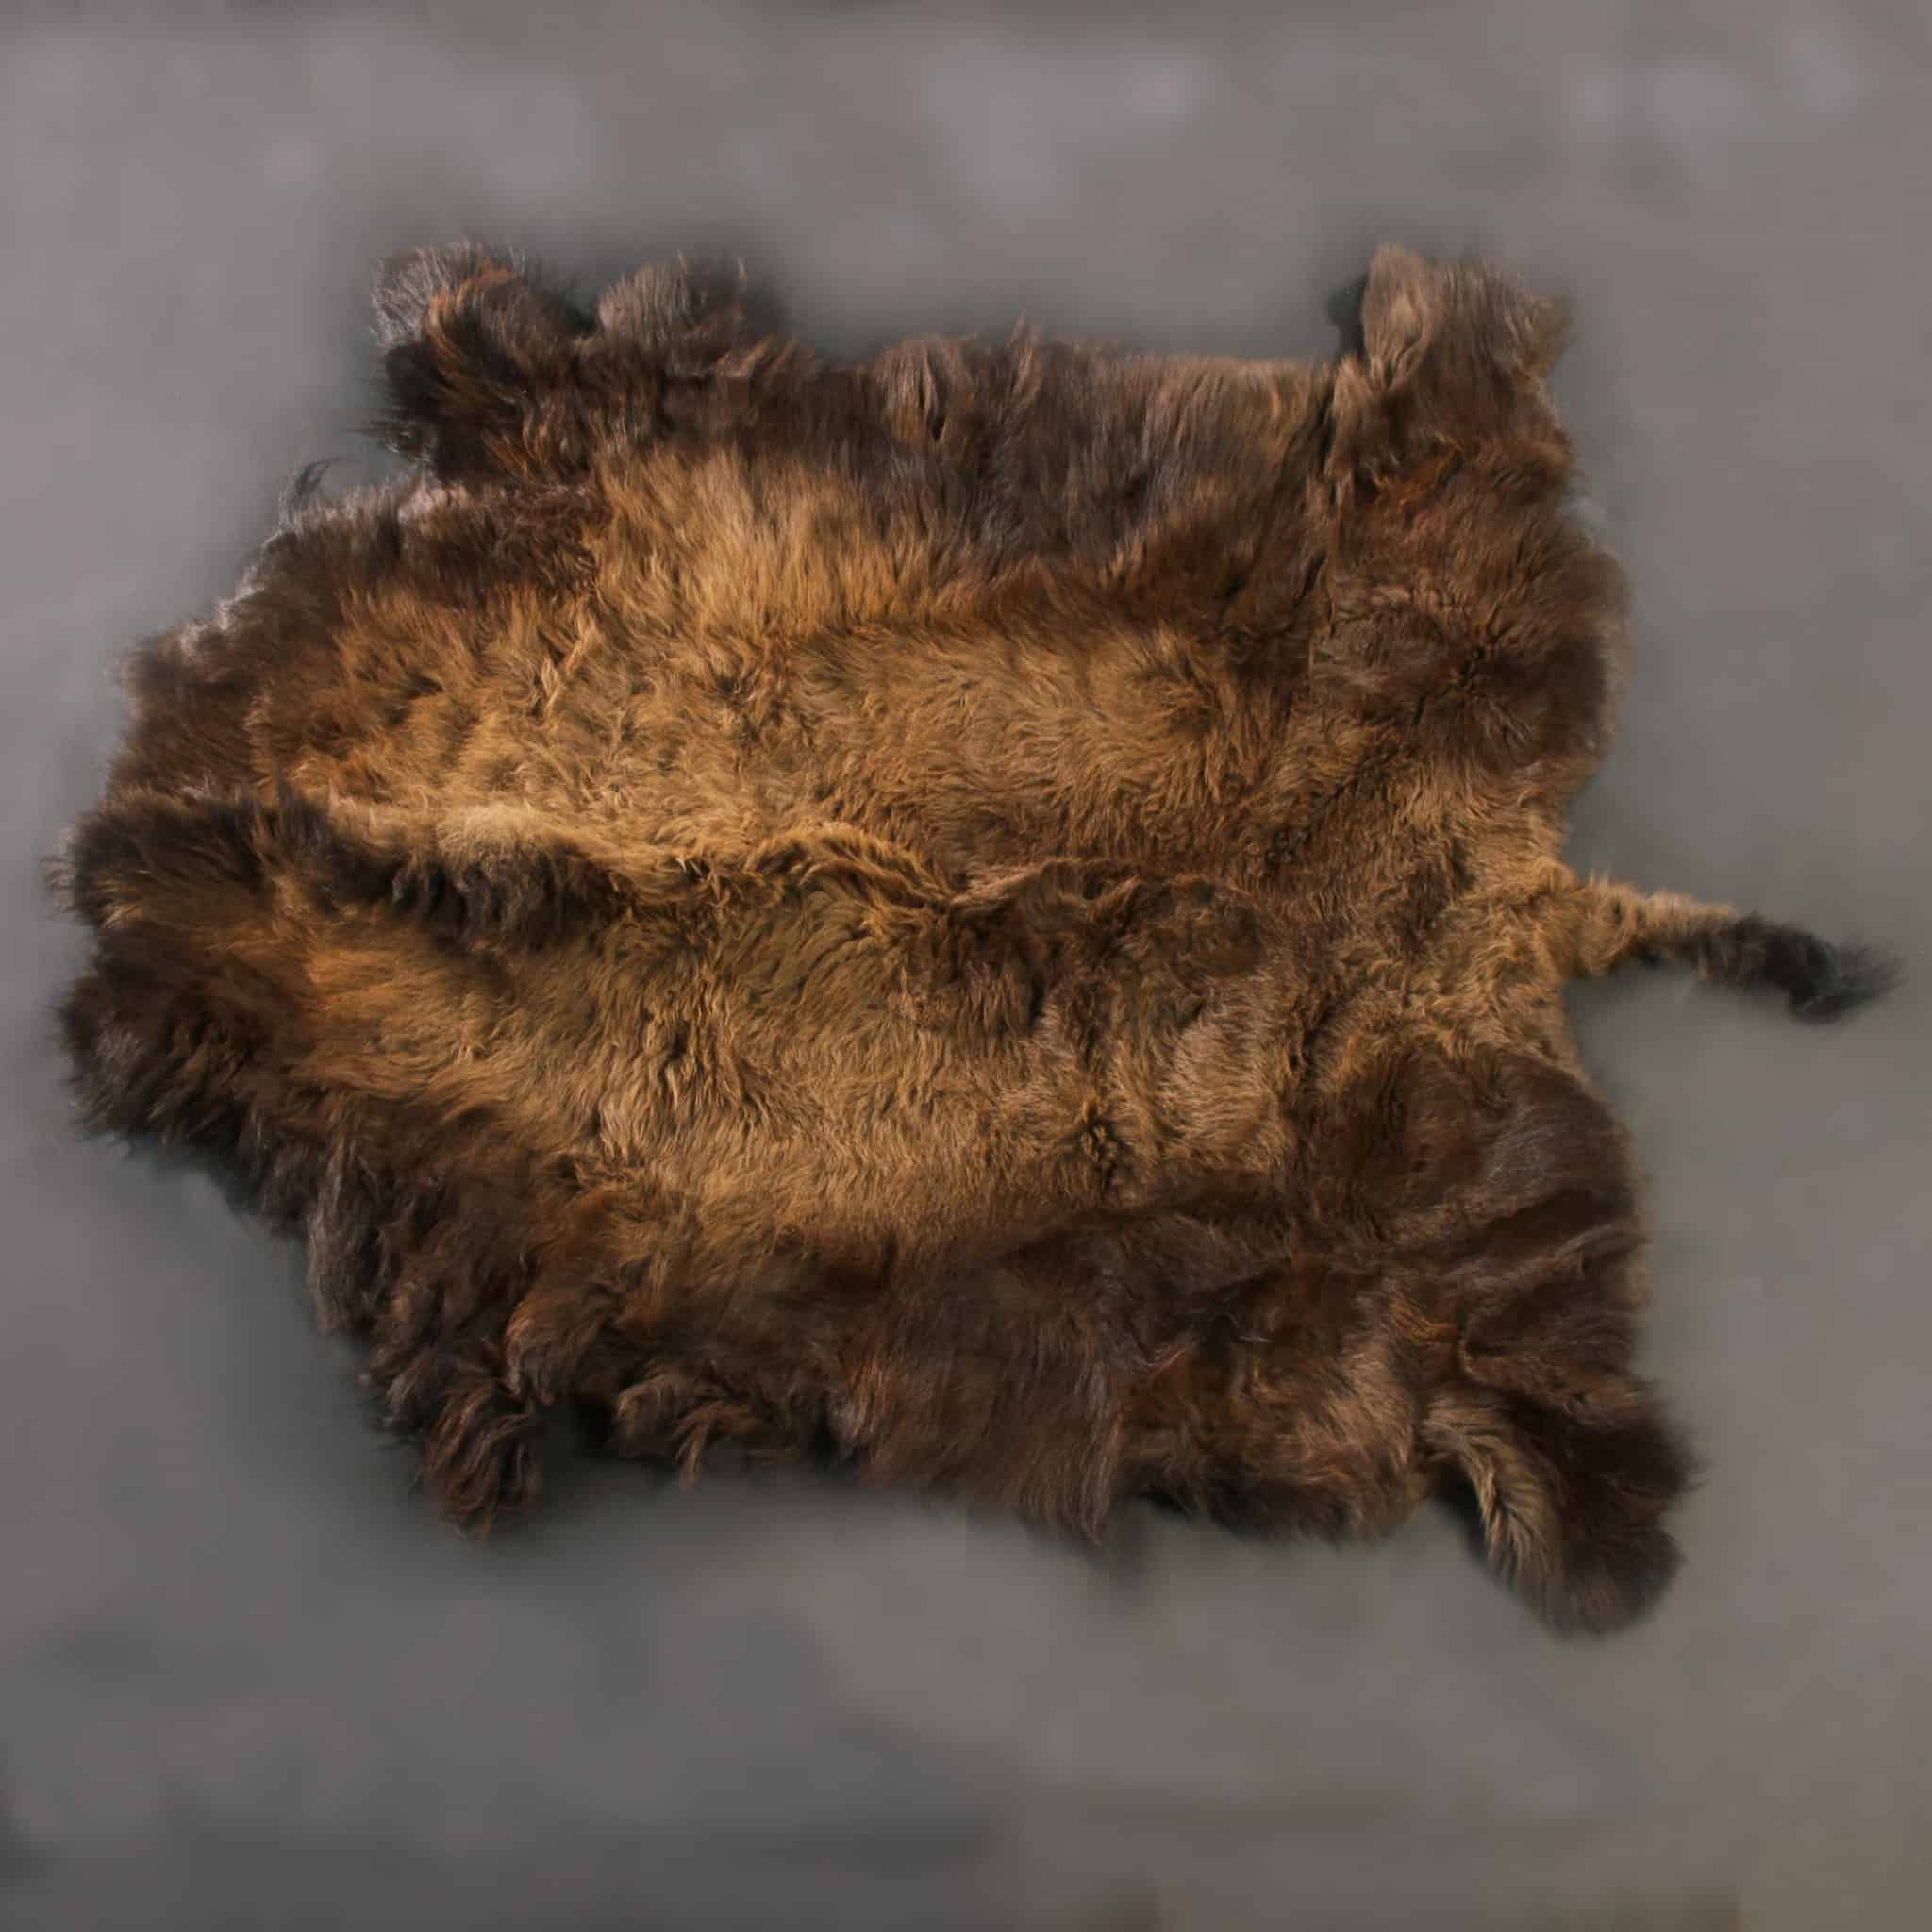 Buffalo/Bison Hides & Robes | All-American. Guaranteed by Merlin's Hide Out